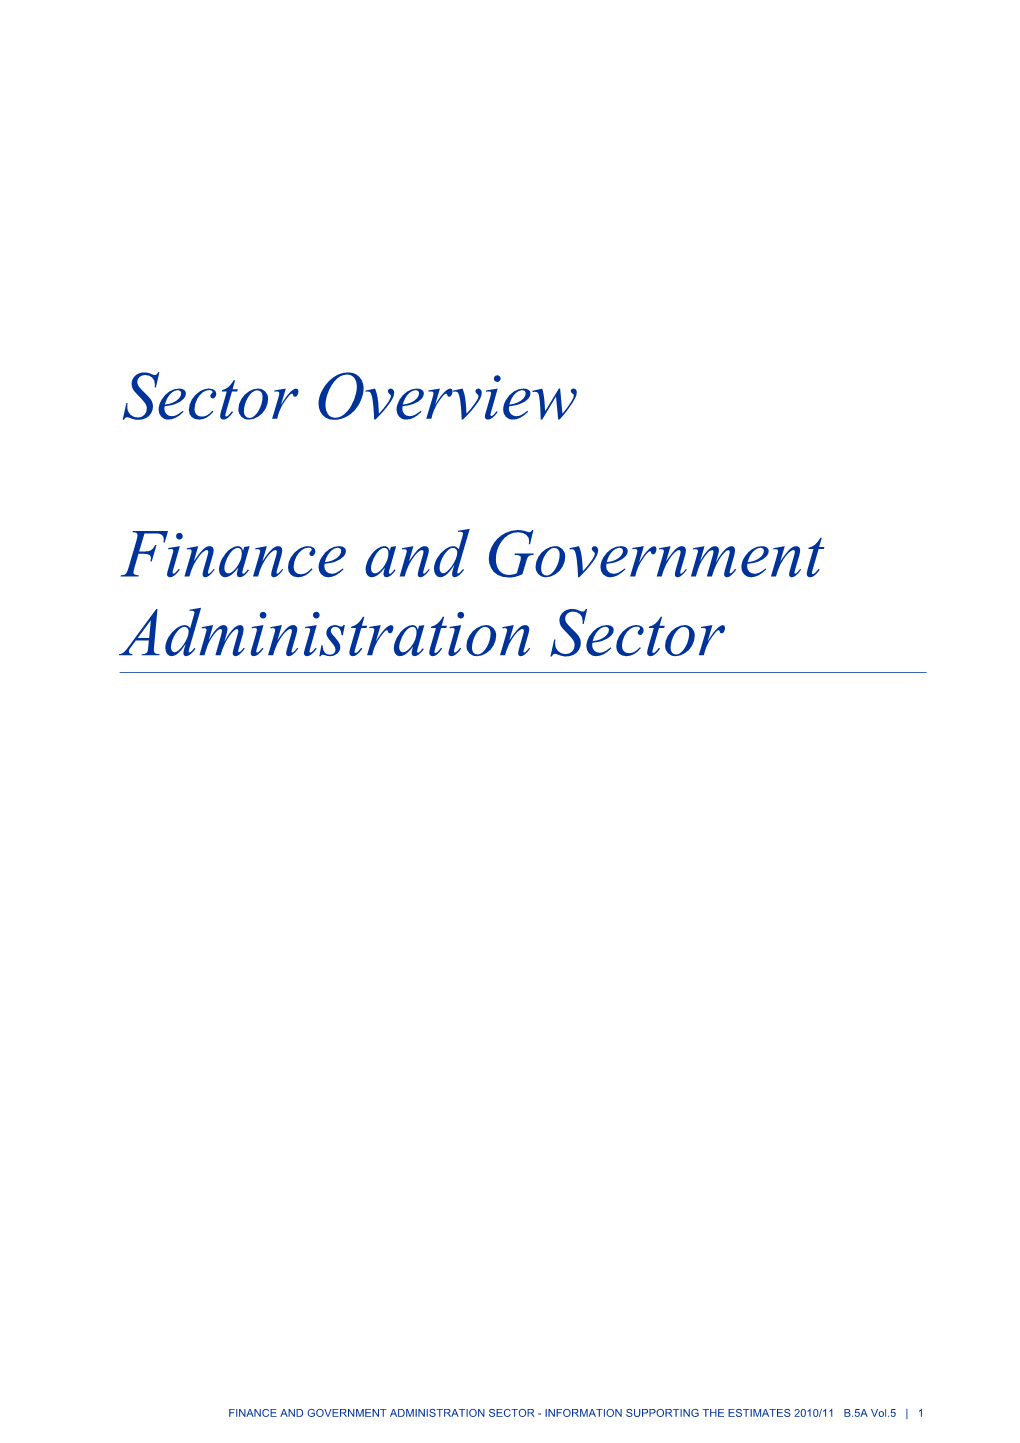 Vol 5 Finance and Government Administration Sector